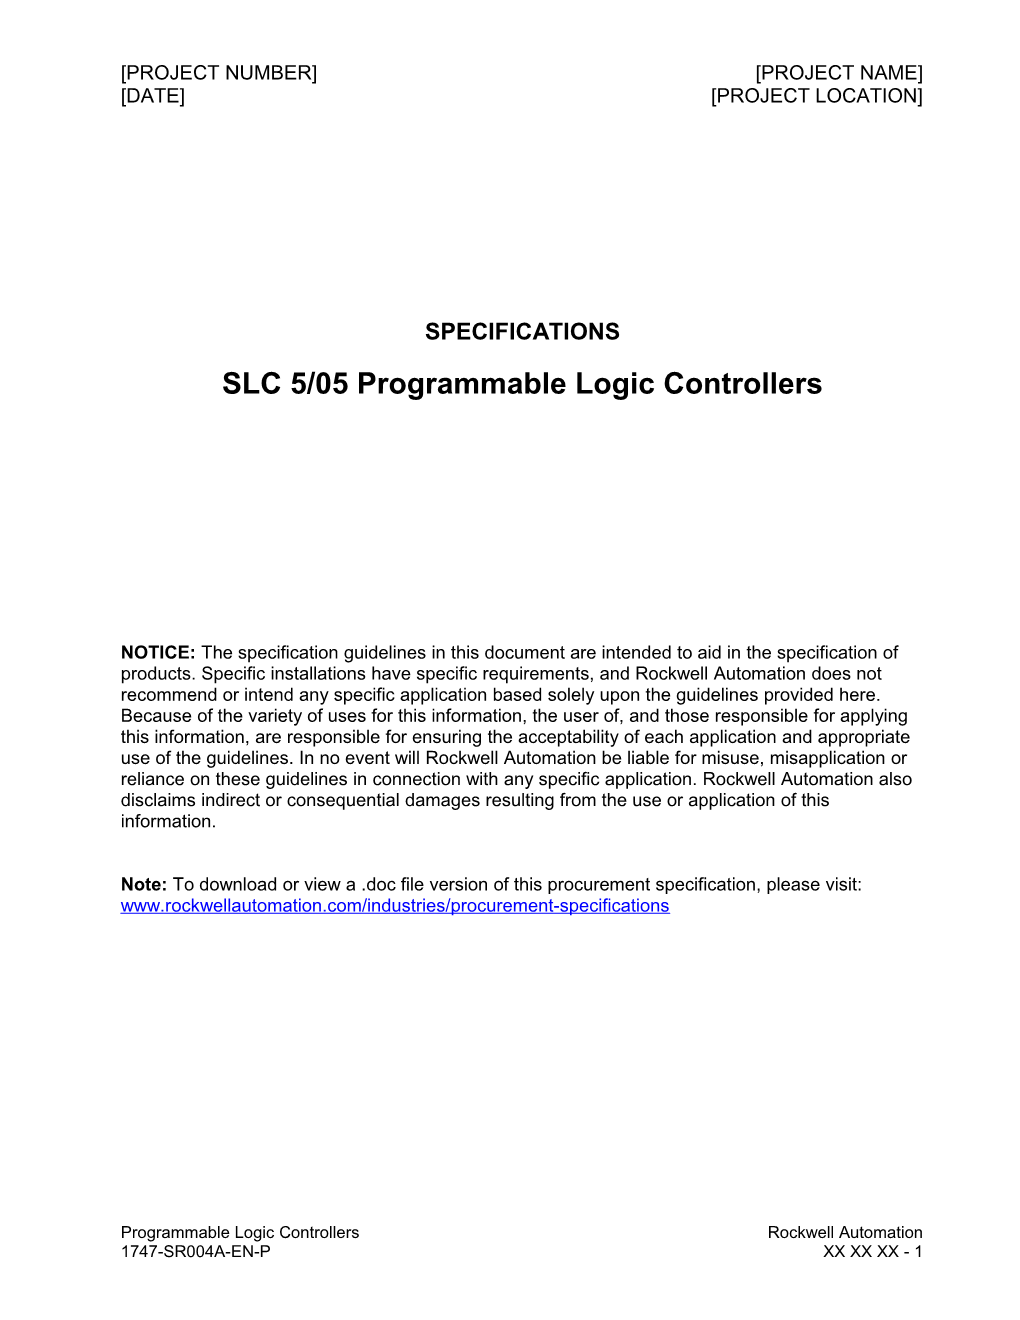 SLC 5/05 Programmable Logic Controllers